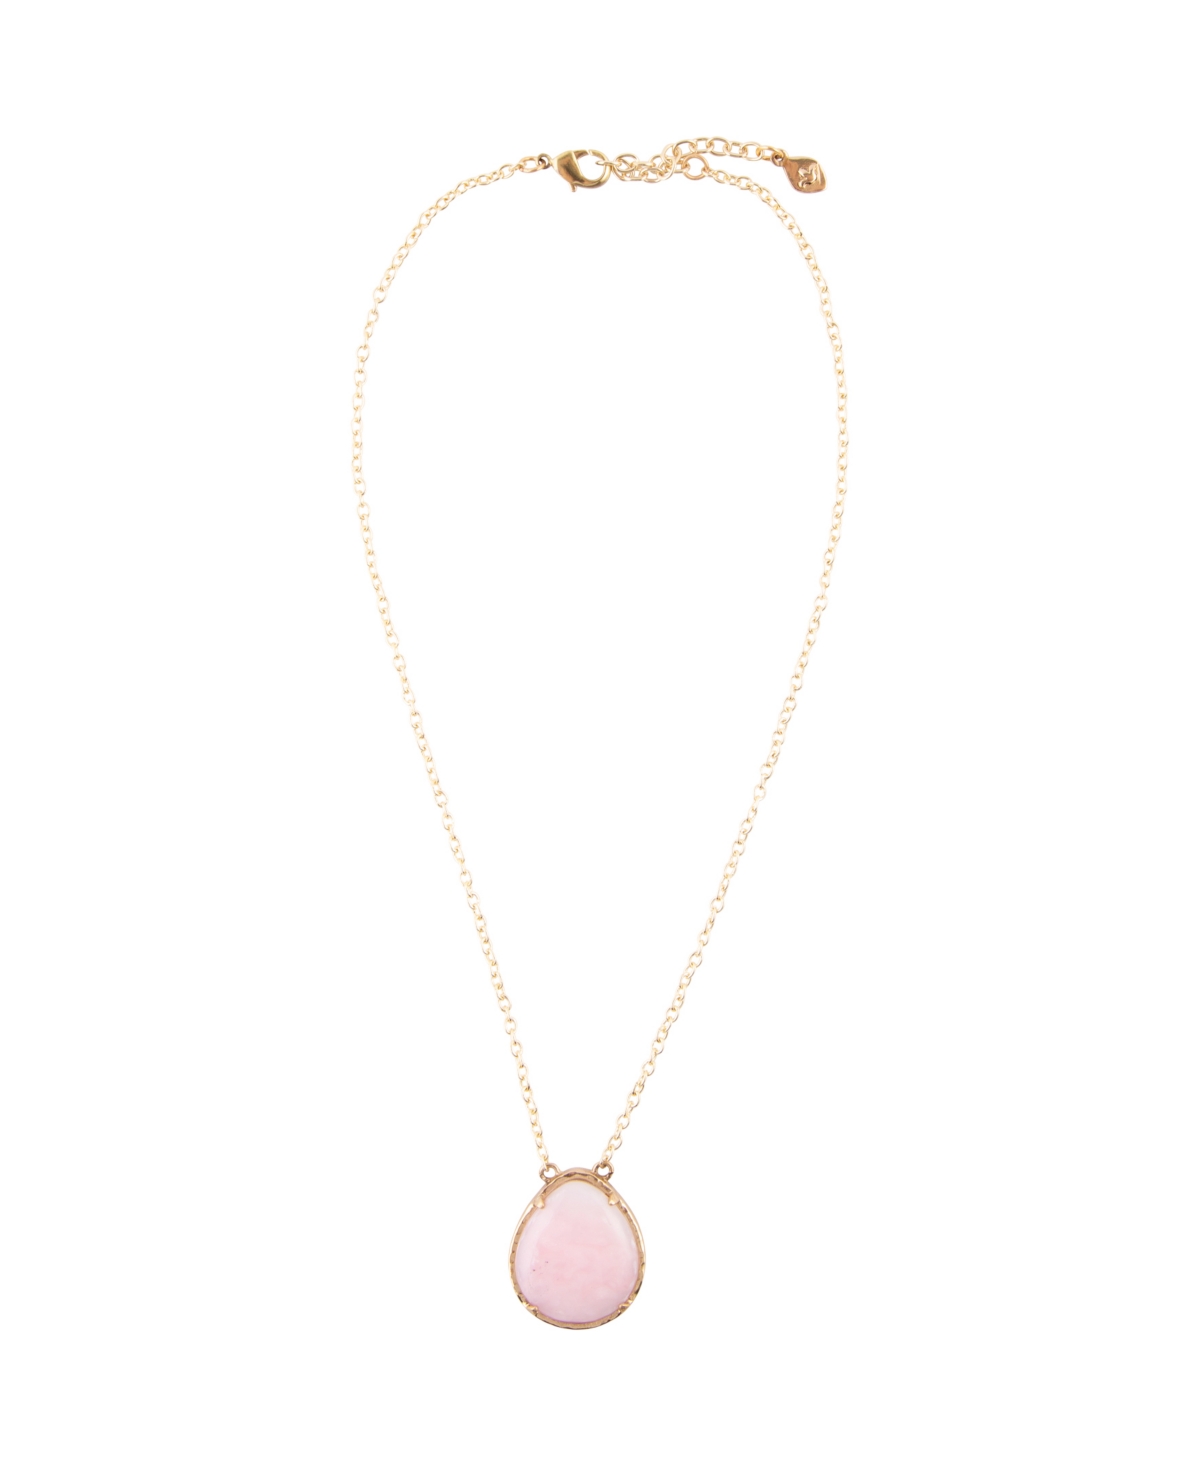 Dreamy Bronze and Genuine Pink Opal Pendant Necklace - Pink Opal